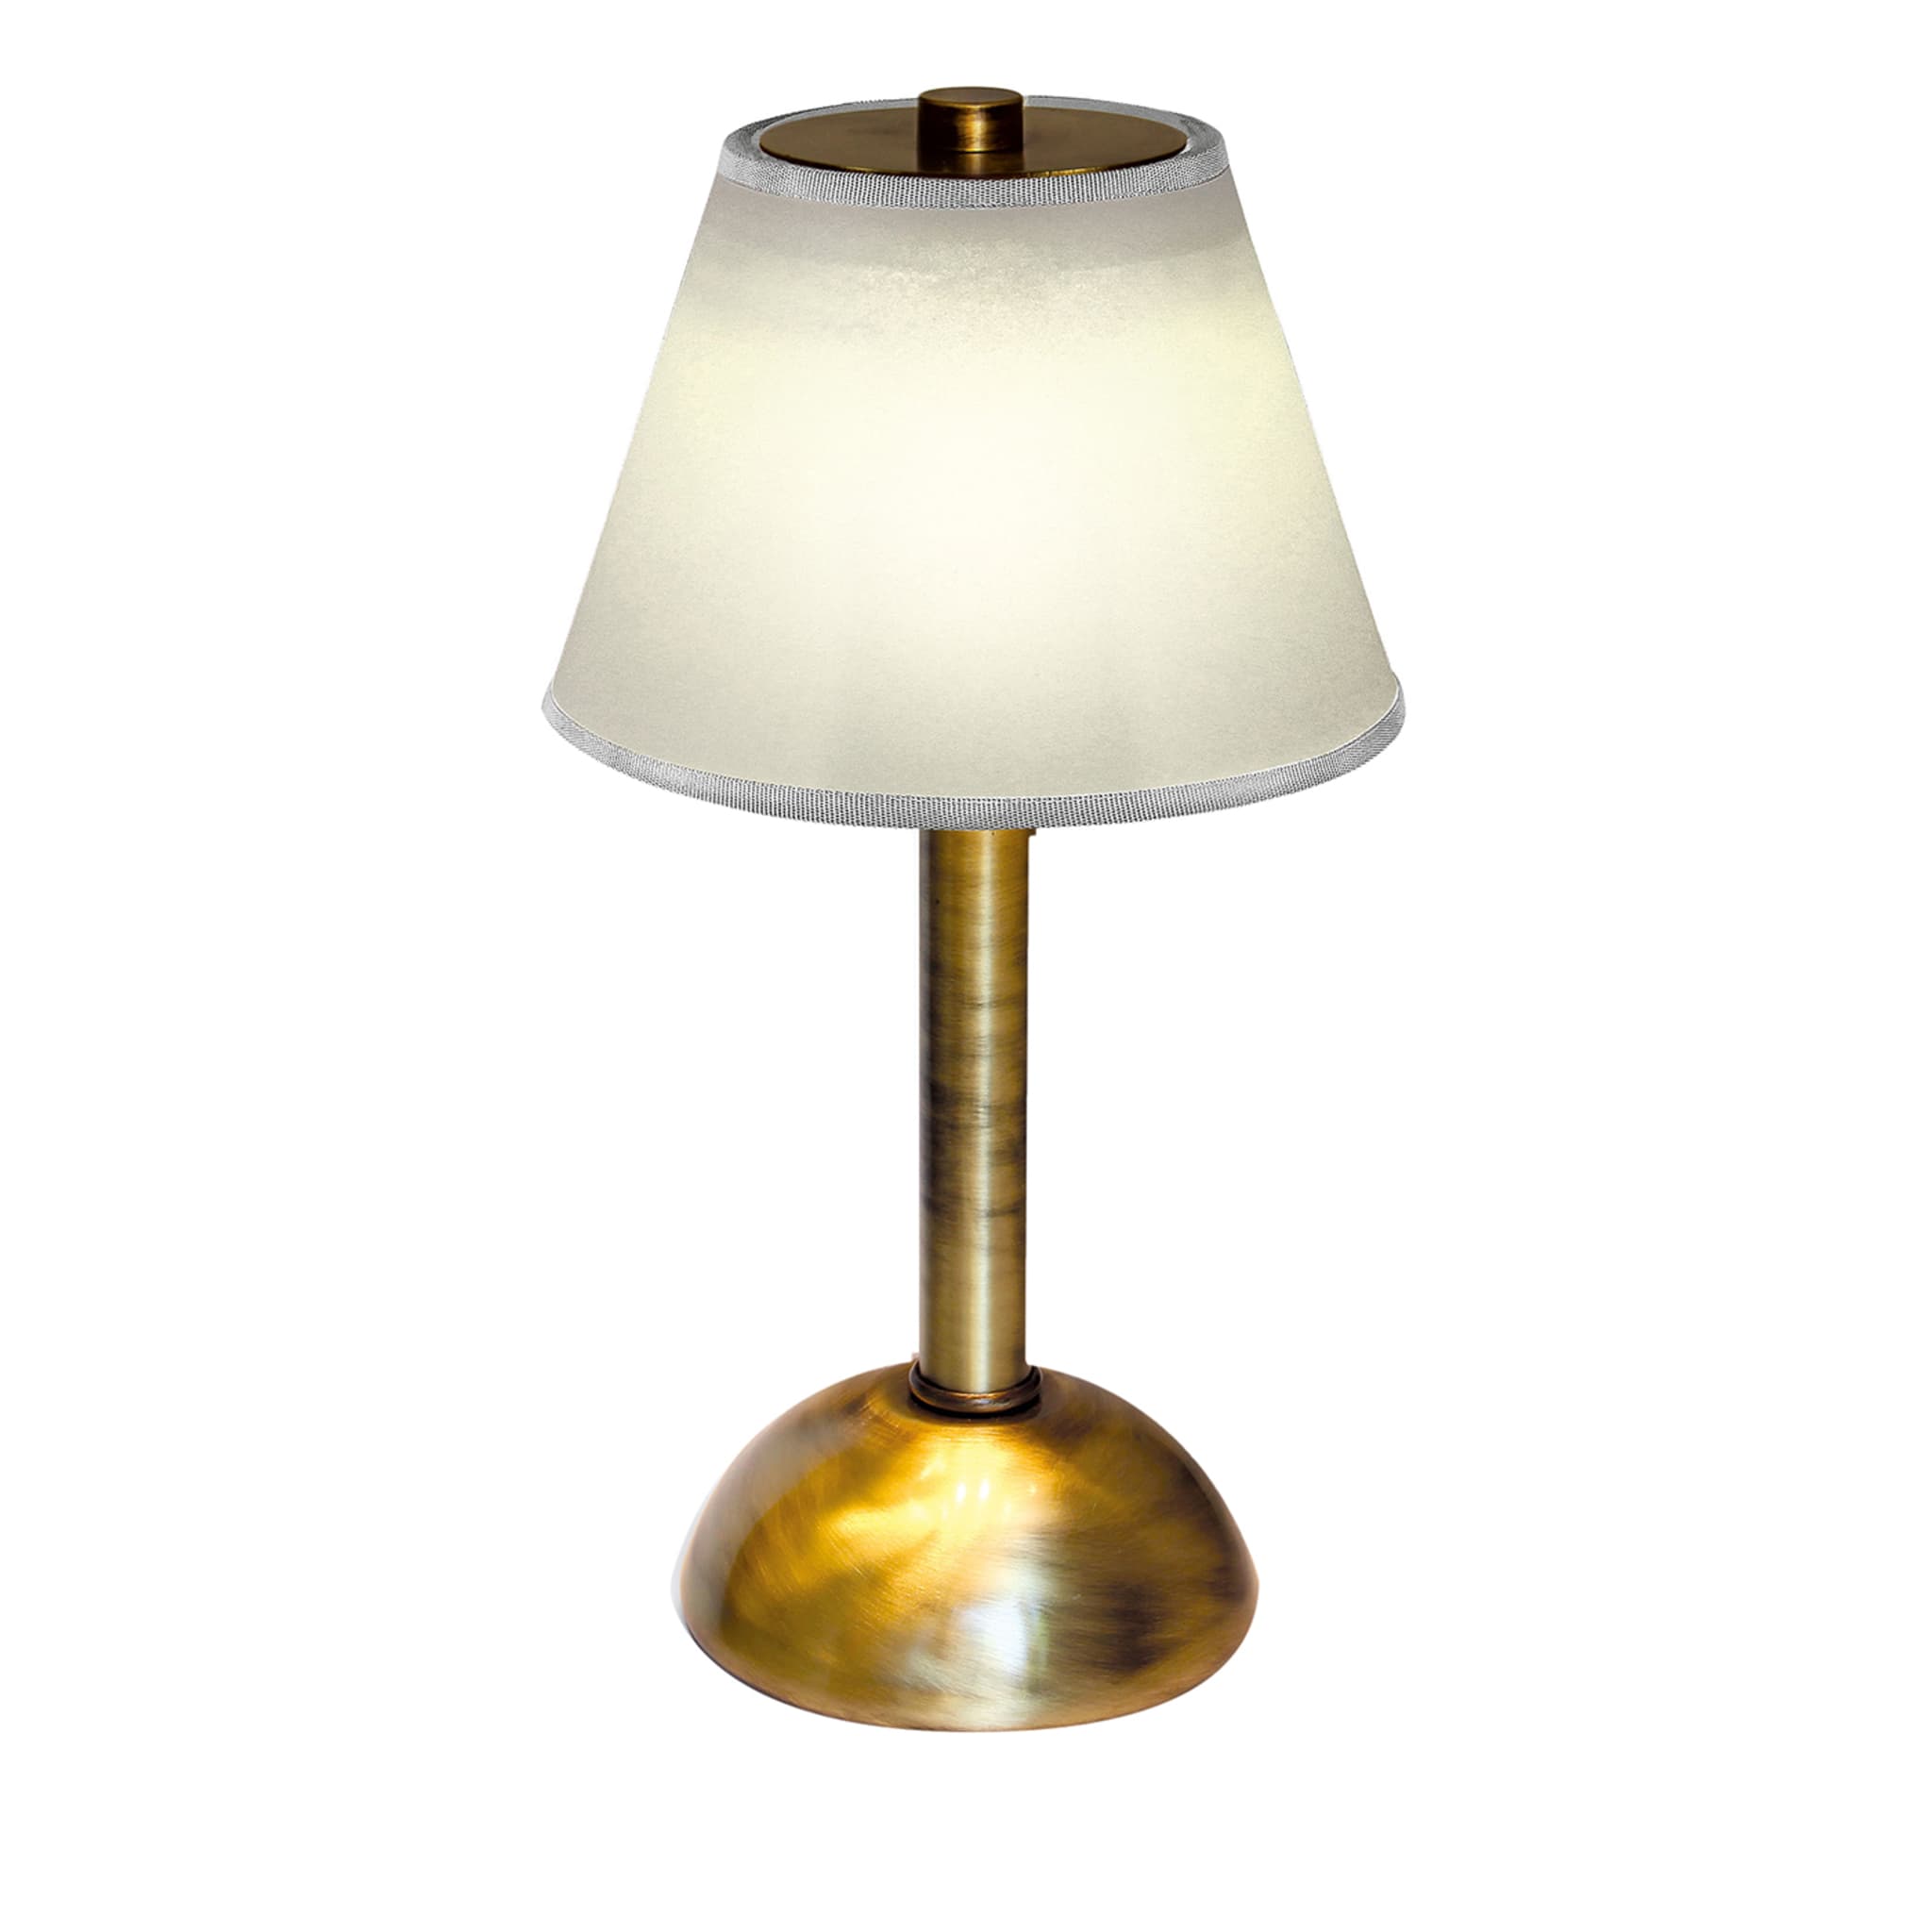 Moon Pergamena & Brushed Bronze Table Lamp by Stefano Tabarin - Main view